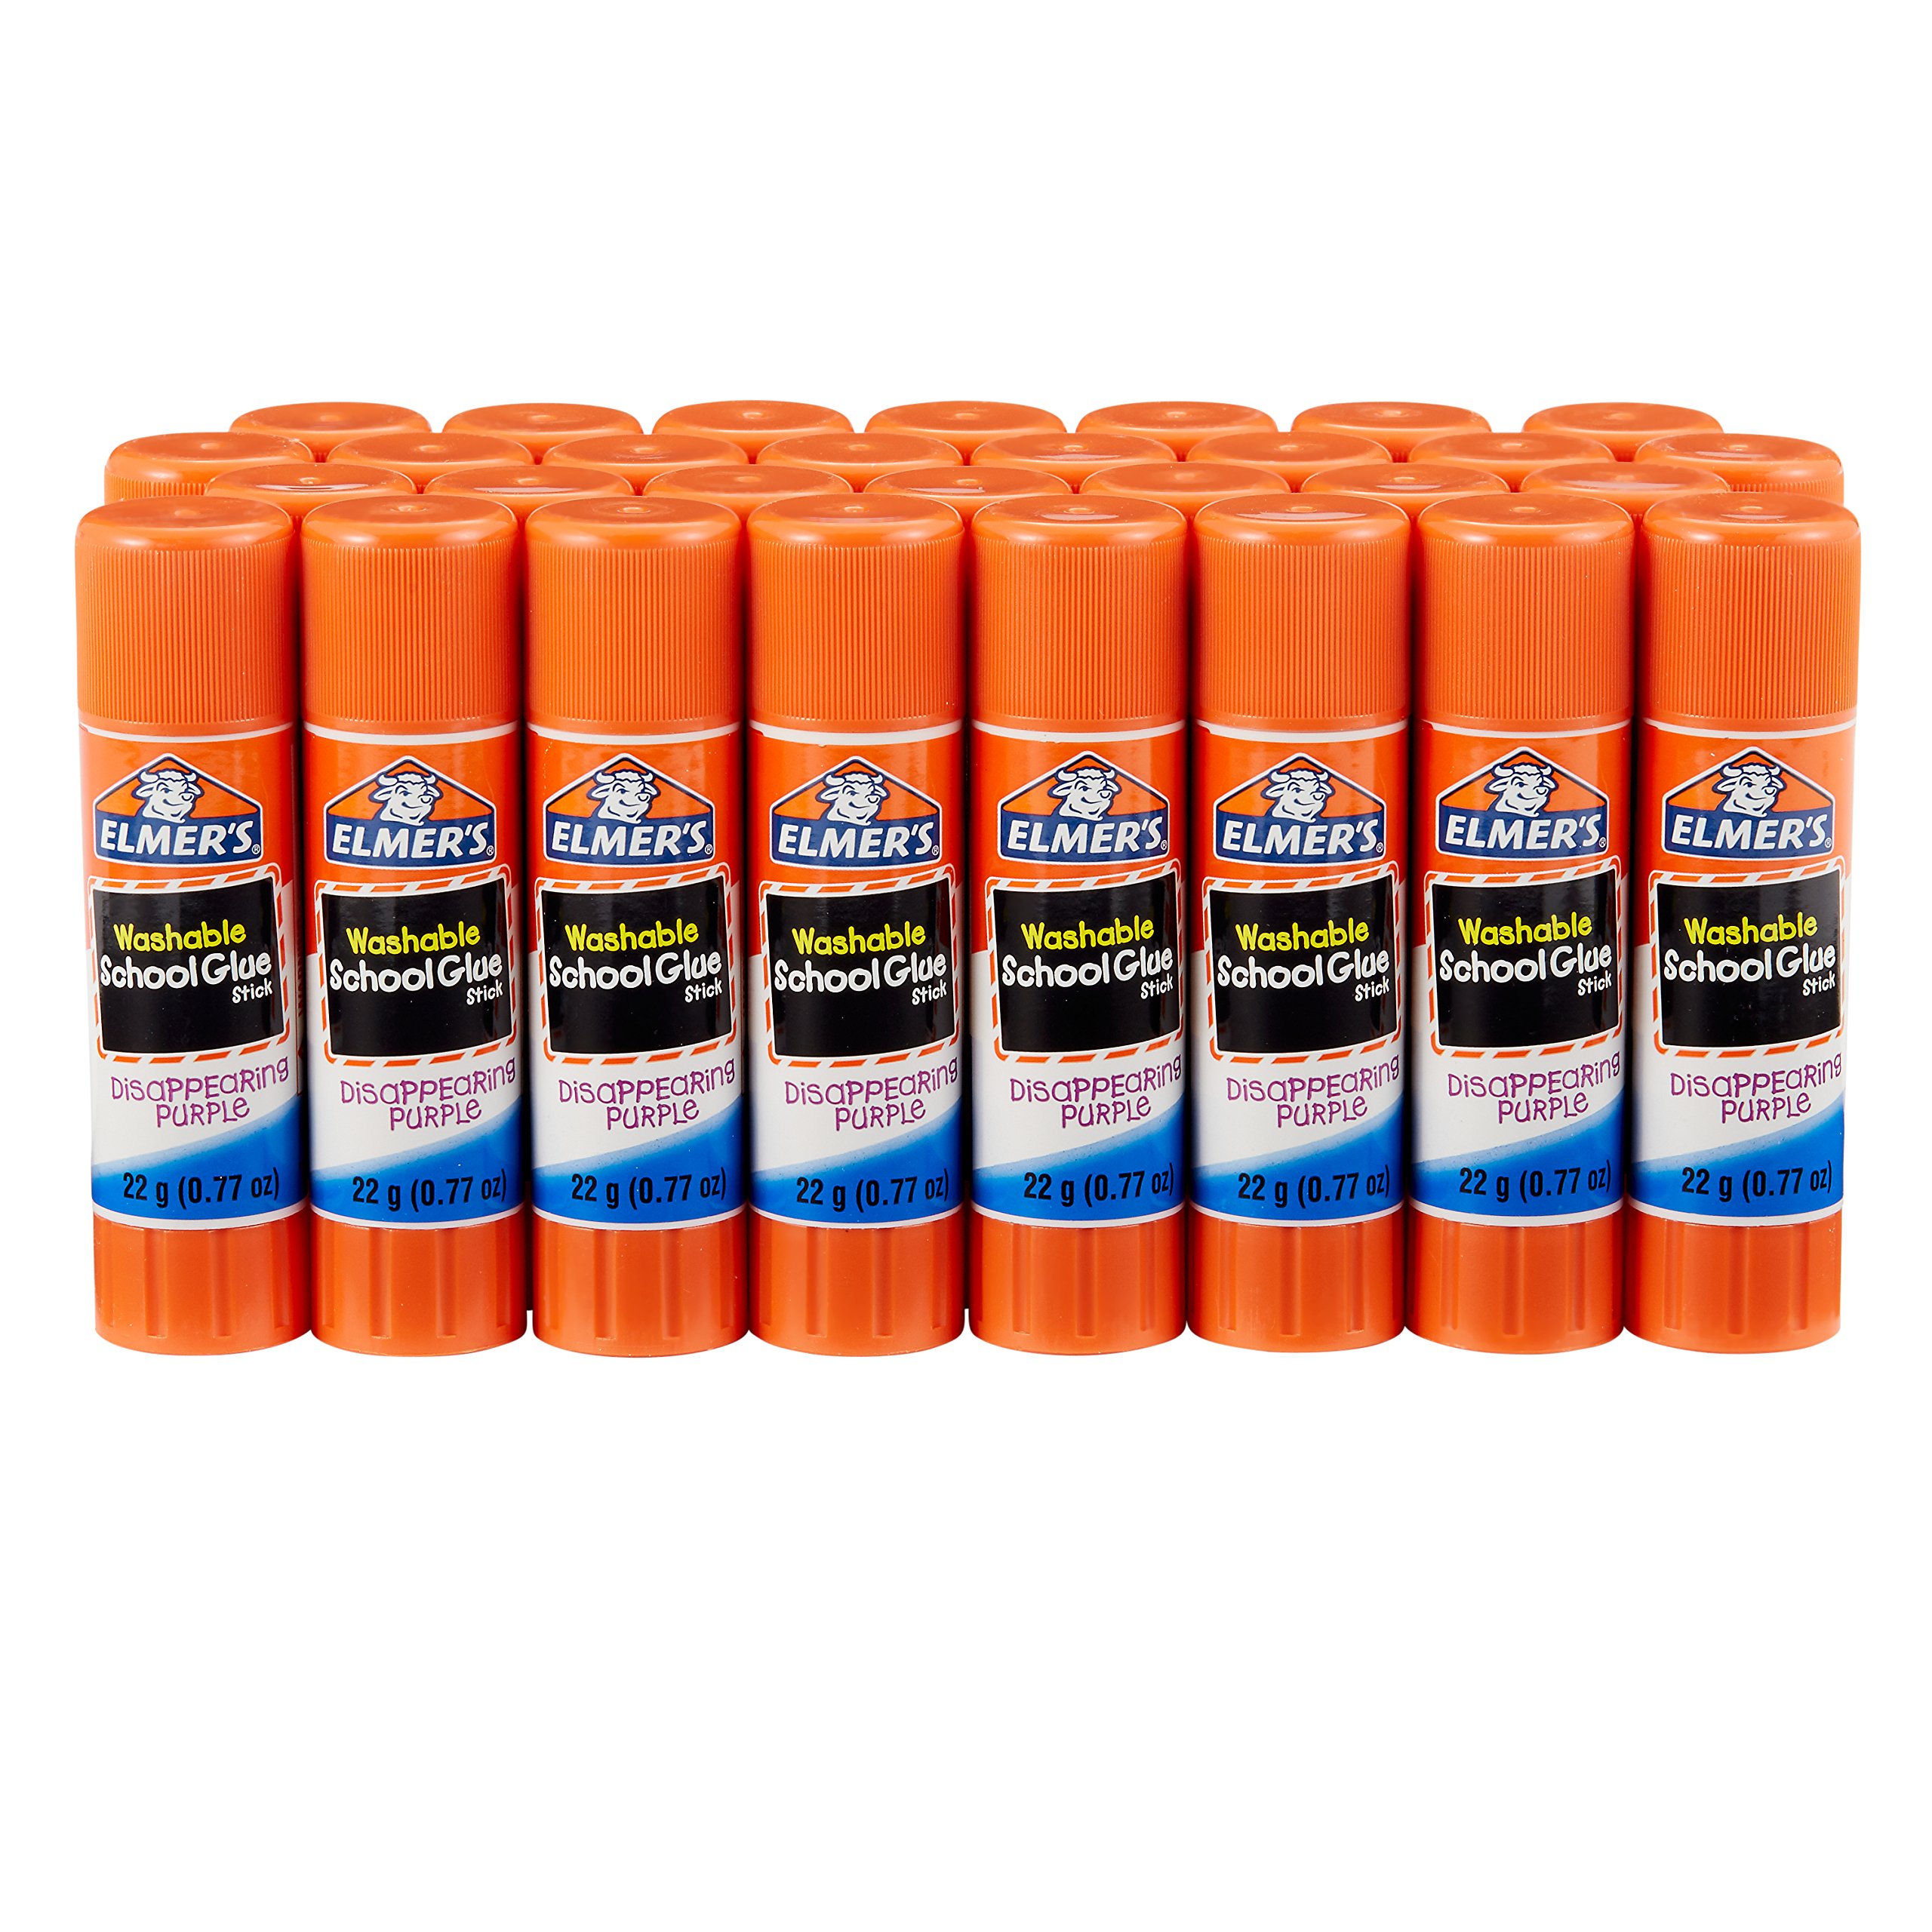 30-Count 22-Gram Elmer's Washable School Glue Sticks (Disappearing Purple) $16.54 + Free Shipping w/ Prime or on Orders $25+